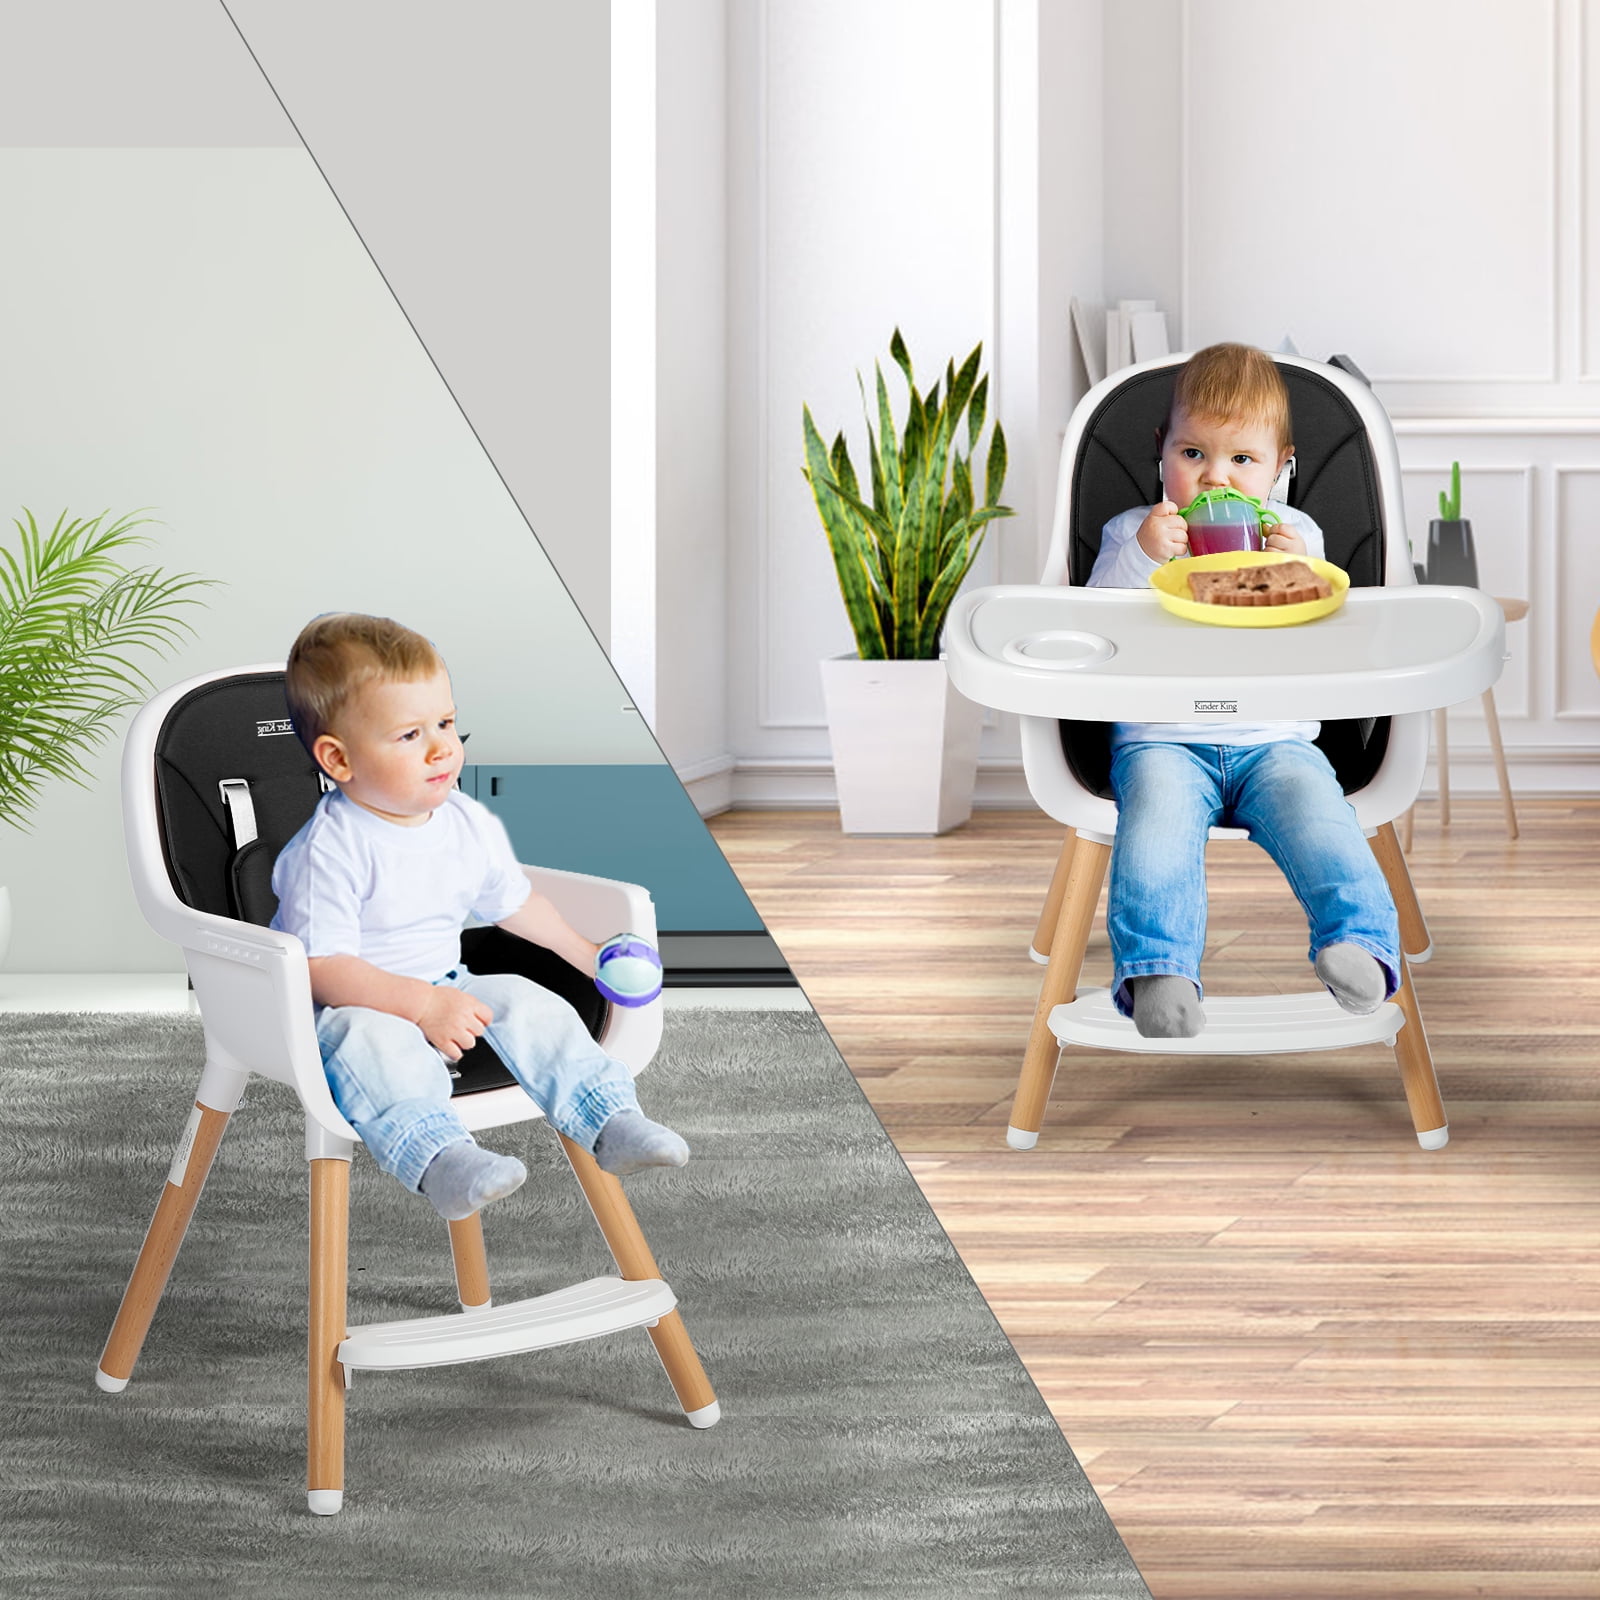 Kinder King 3 in 1 Wooden Baby High Chair Infant Feeding Chair